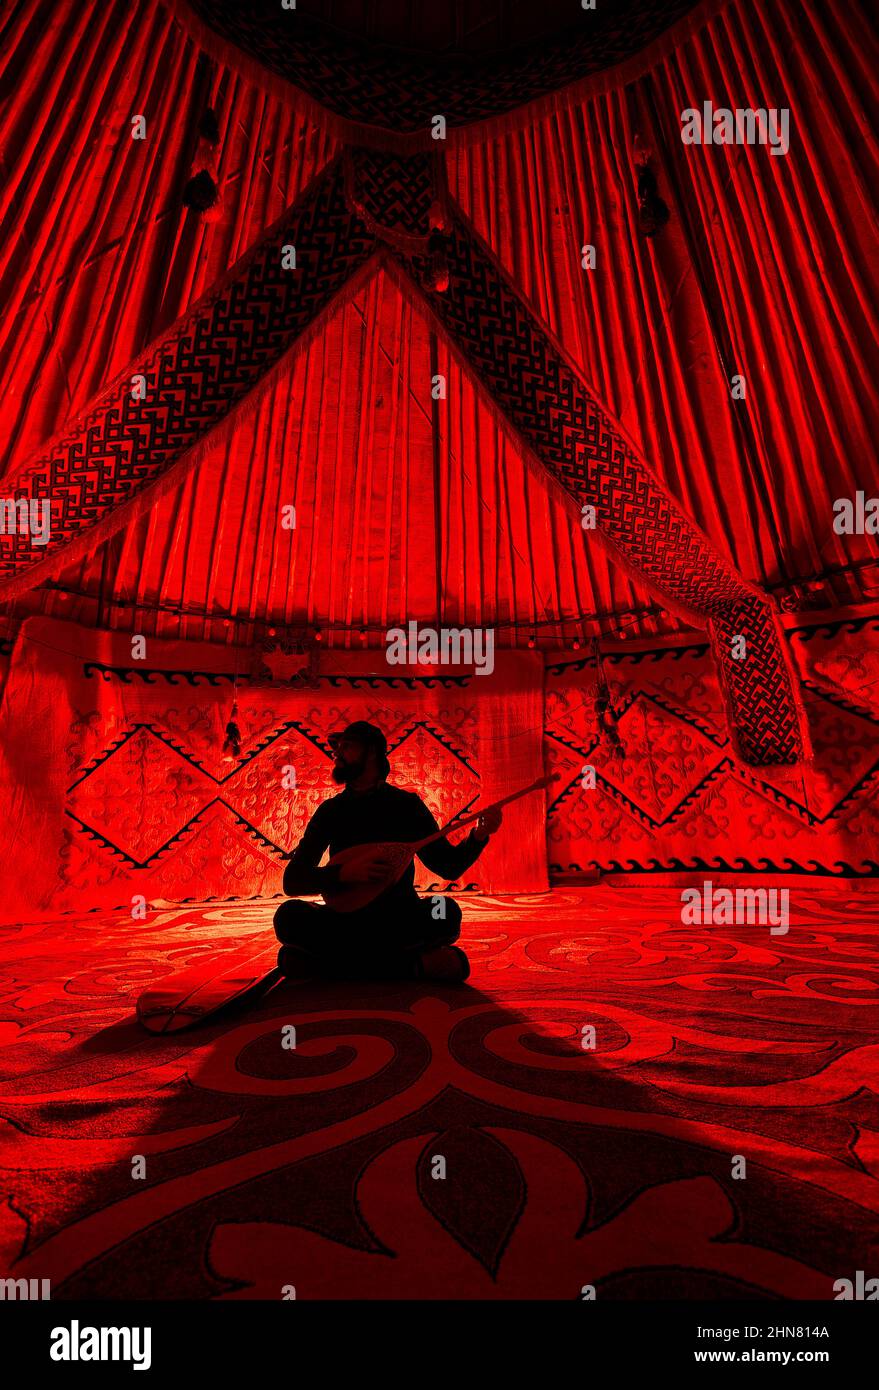 Silhouette of Man holding and playing dombra string instrument inside Yurt nomadic house against carpet with ethnic patterns lit by red light interior Stock Photo